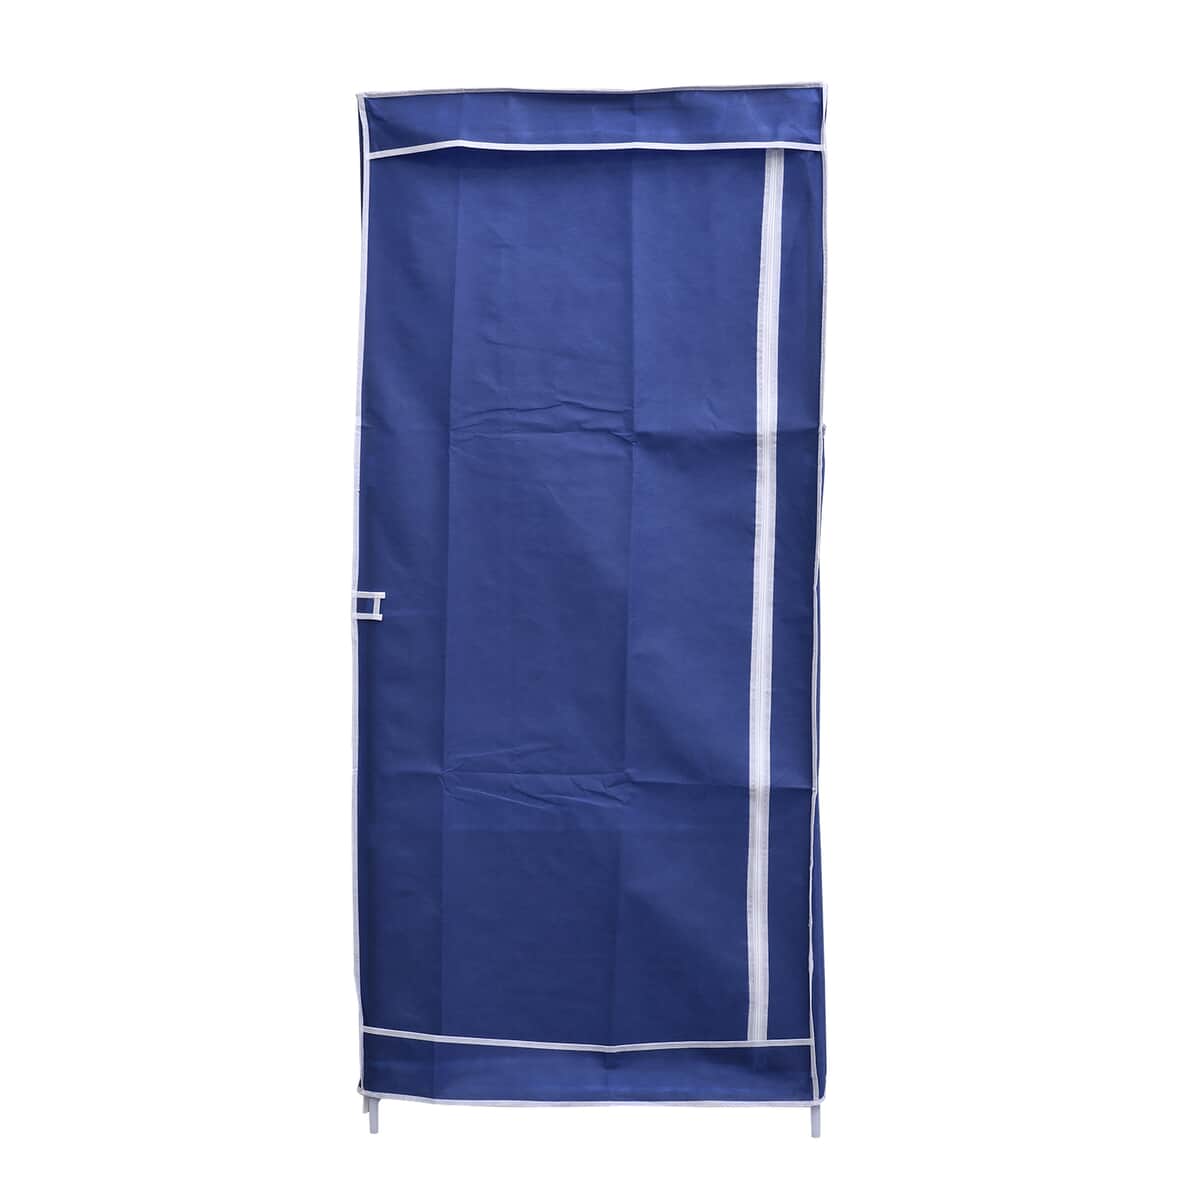 Blue Collapsible Wardrobe with 2 Outer pockets and Zippered Door (27"x17"X59") (Non-Woven Fabric) image number 0